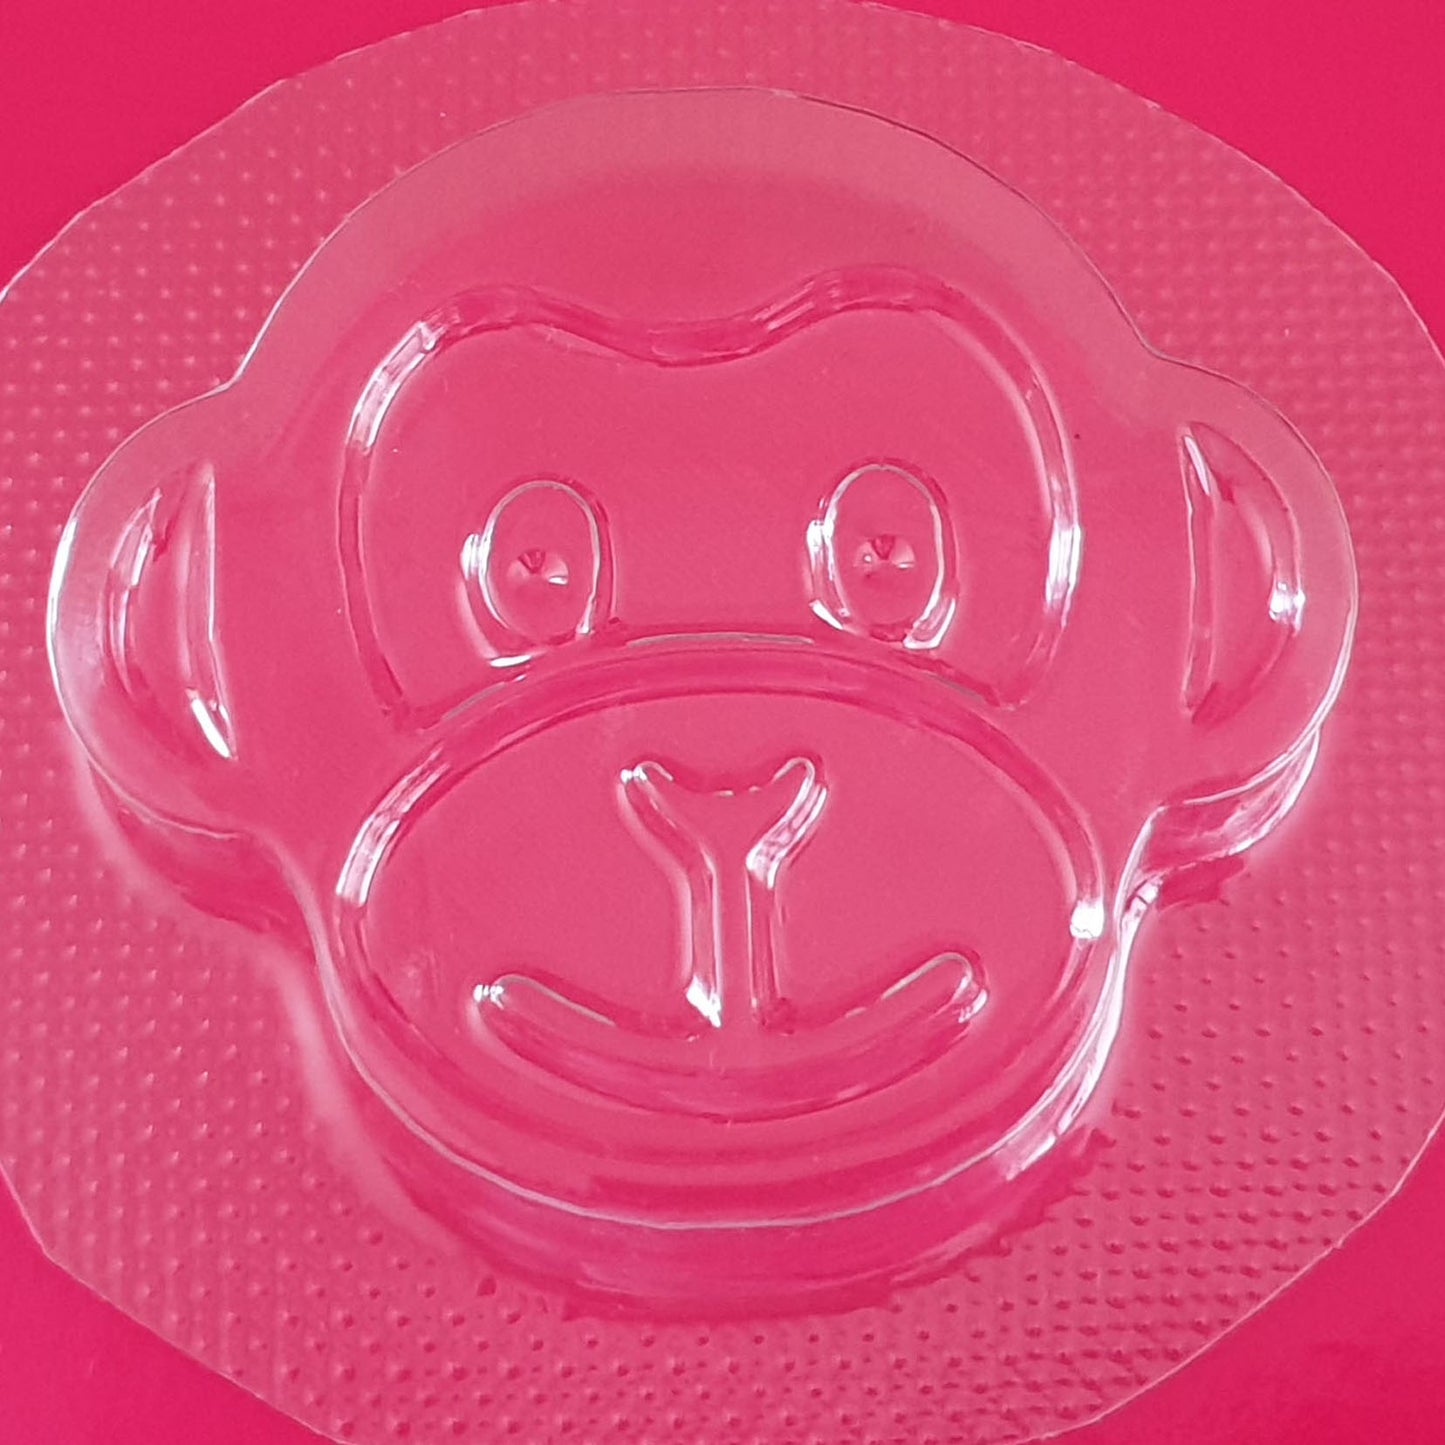 Monkey Mould | Truly Personal | Bath Bomb, Soap, Resin, Chocolate, Jelly, Wax Melts Mold